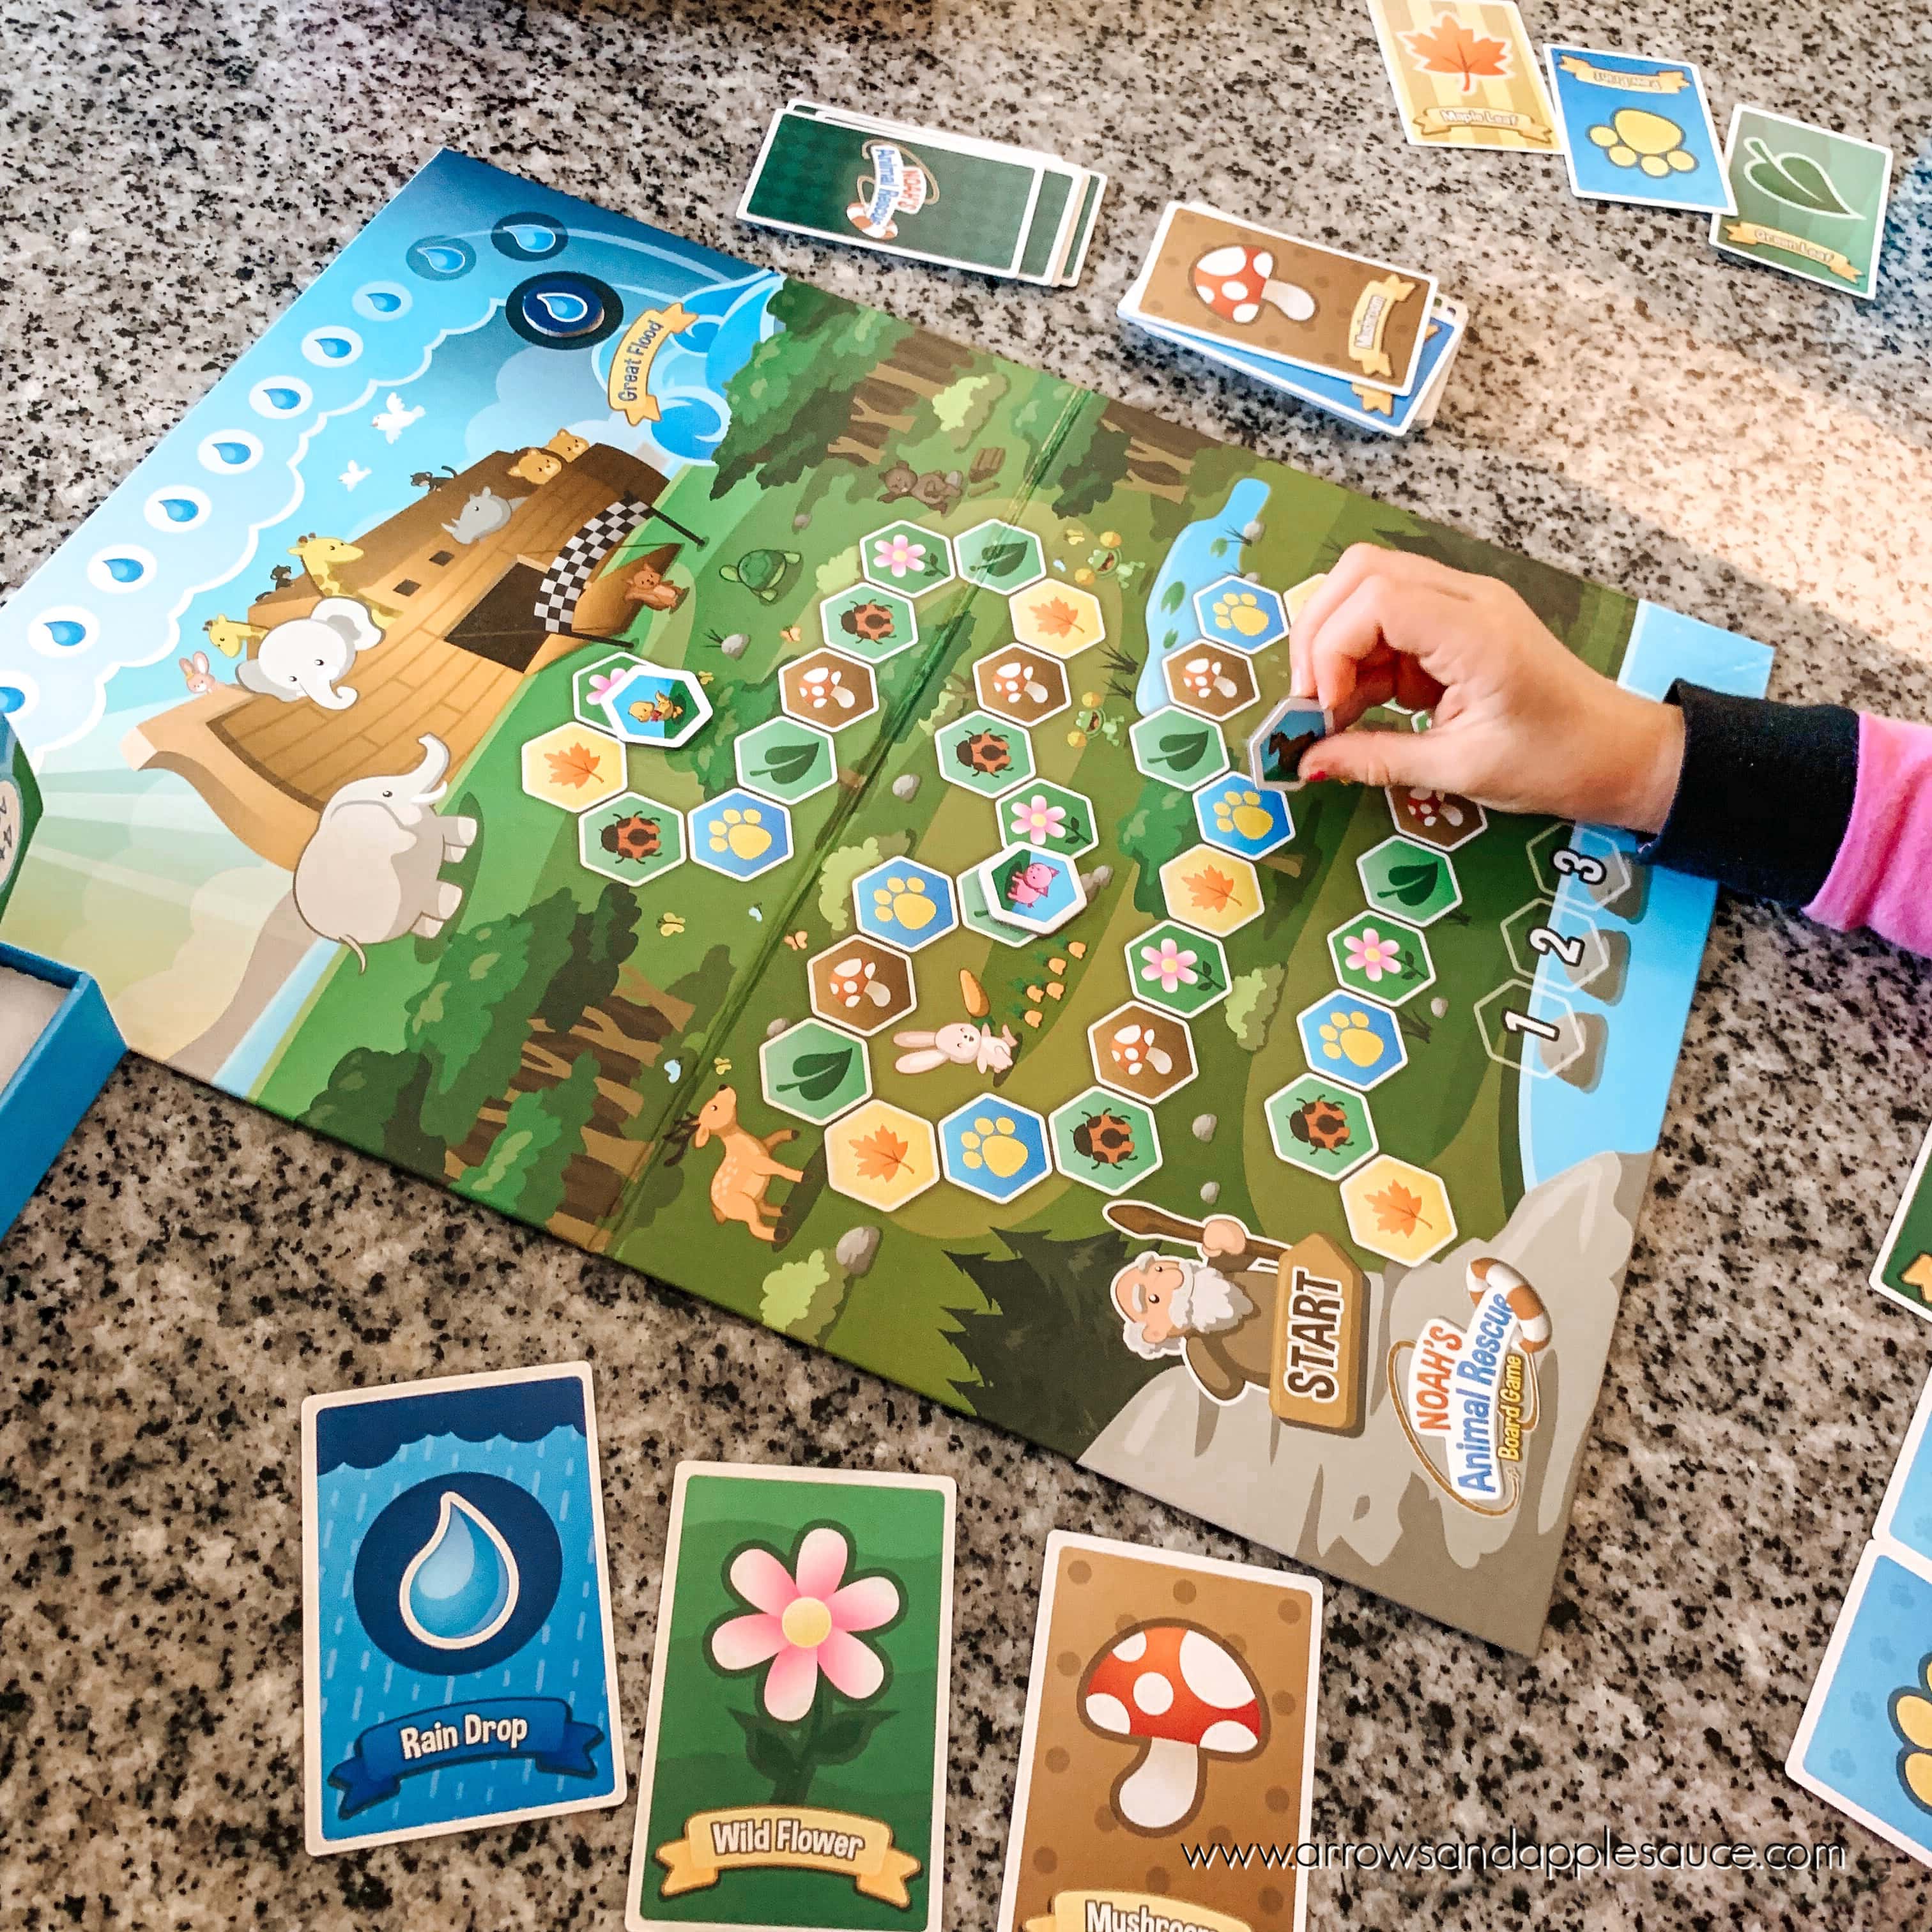 We're game schooling our way through the summer! Check out our favorite Bible games, printables, and activities for preschoolers. #gameschooling #kidsbiblegame #bibleboardgame #homeschoolgames #homeschoolpreschool #kidsbibleactivities #noahsark #homeschoolprintables